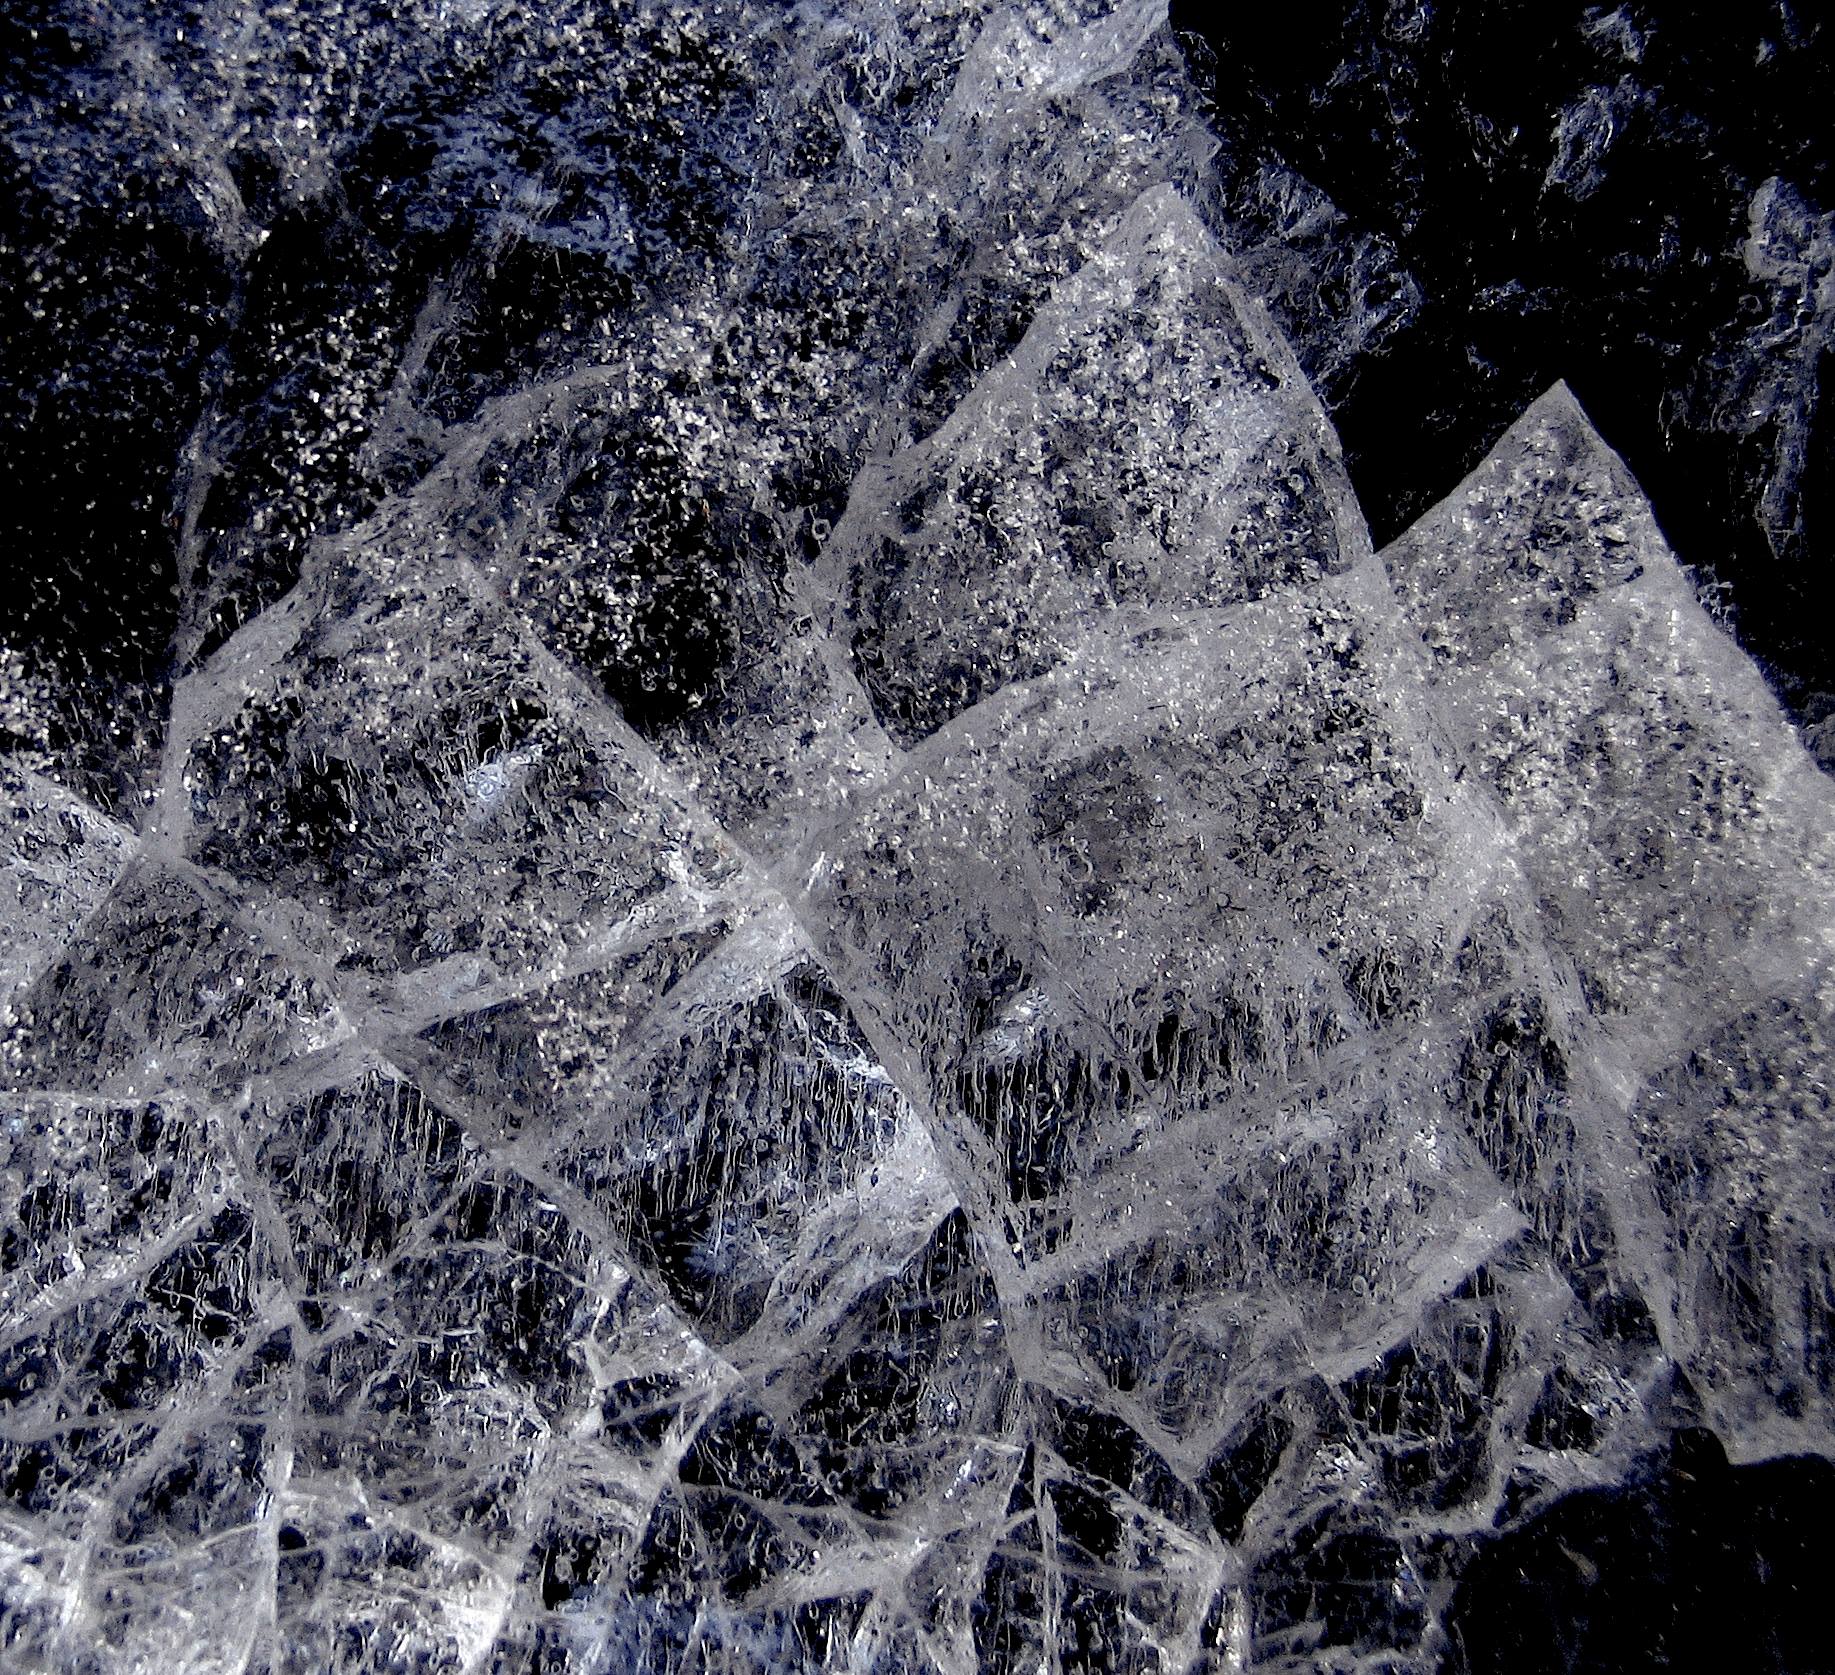 Thick sheet of ice with crosshatched crack patterns against a dark background